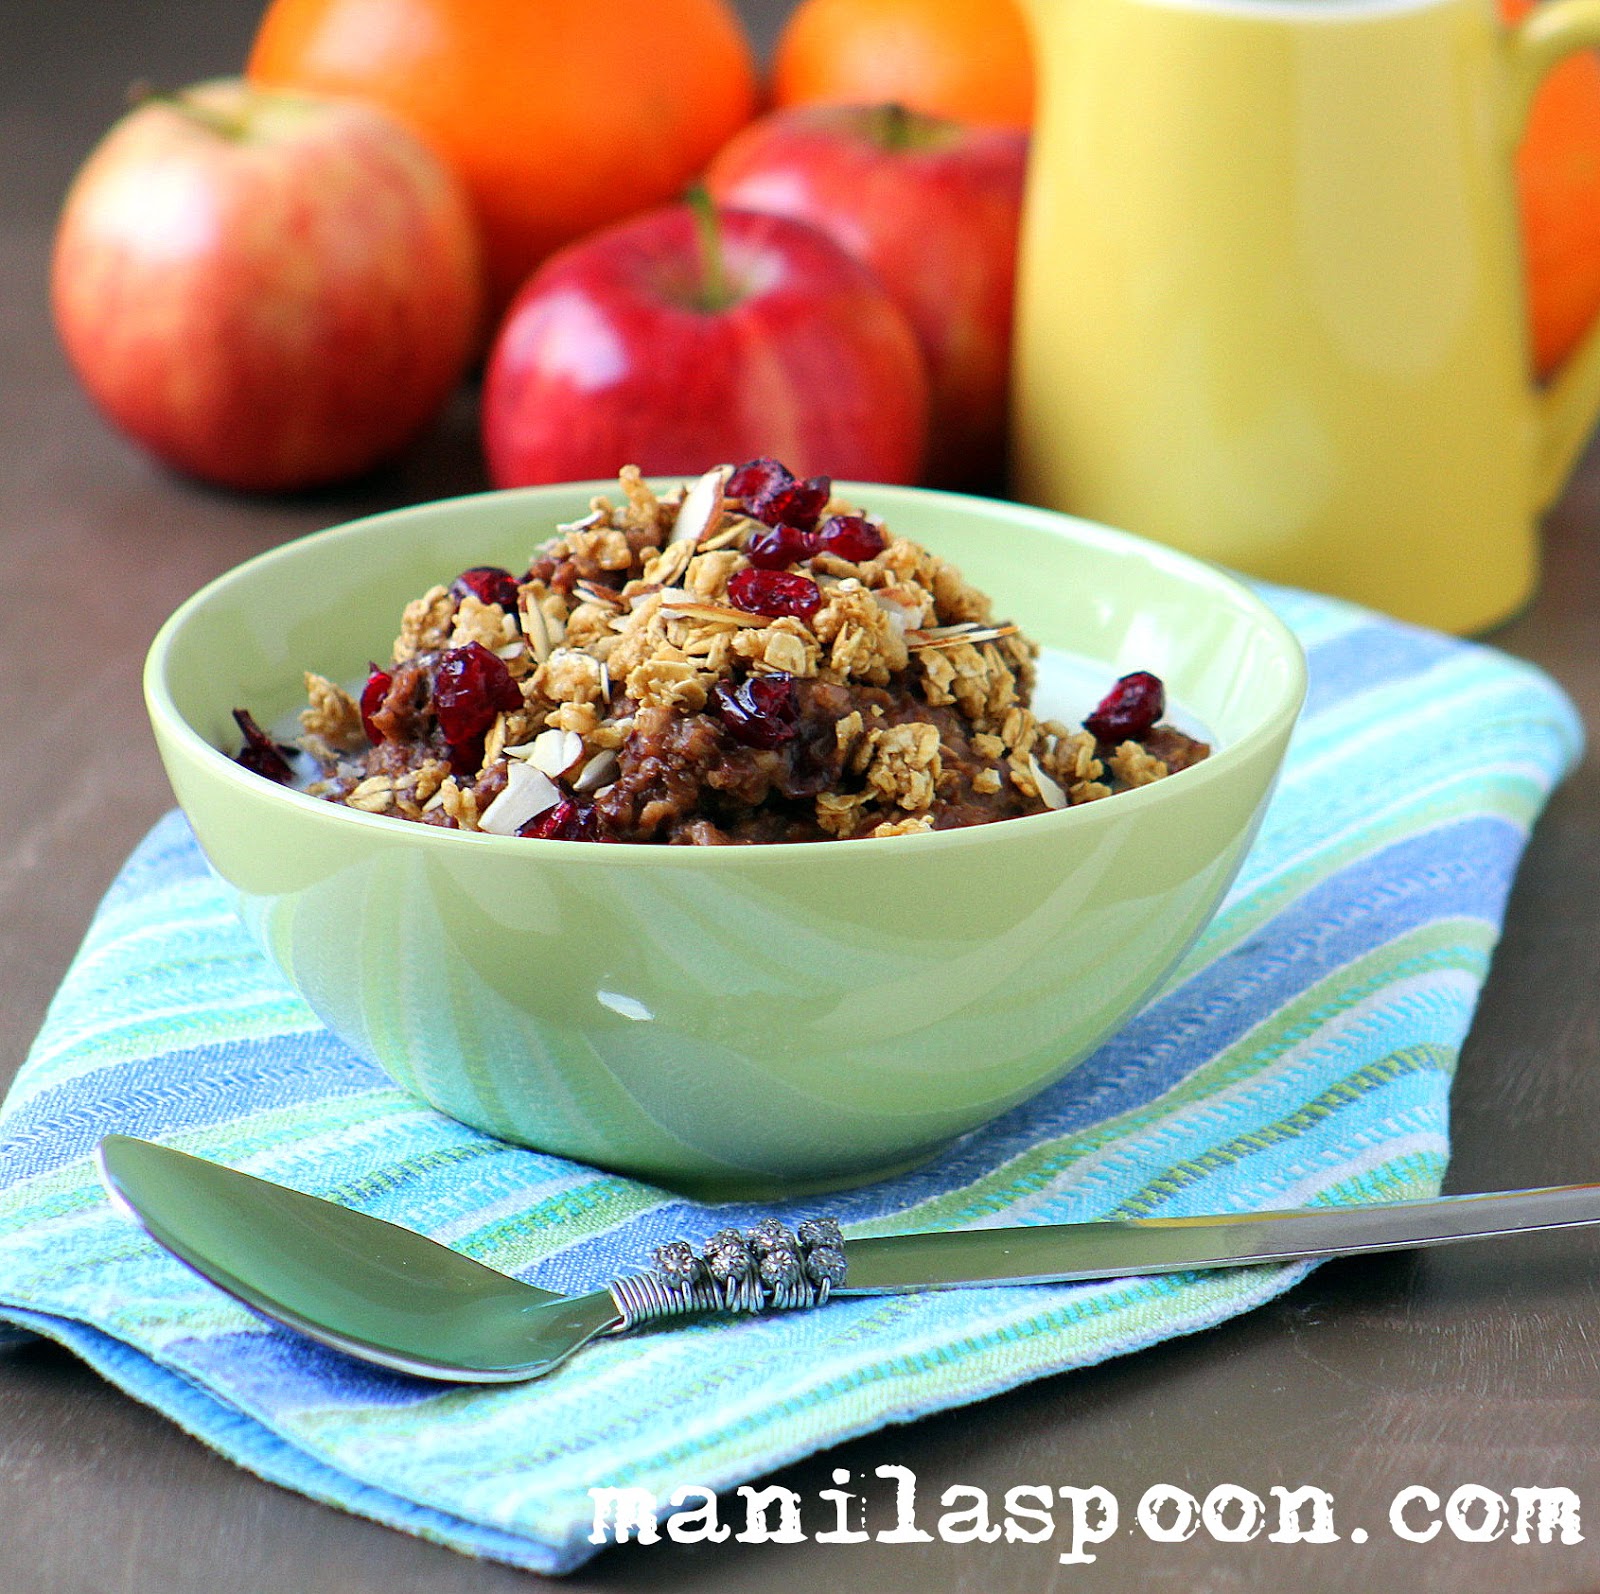 Chocolate Oatmeal with Cranberries and Granola